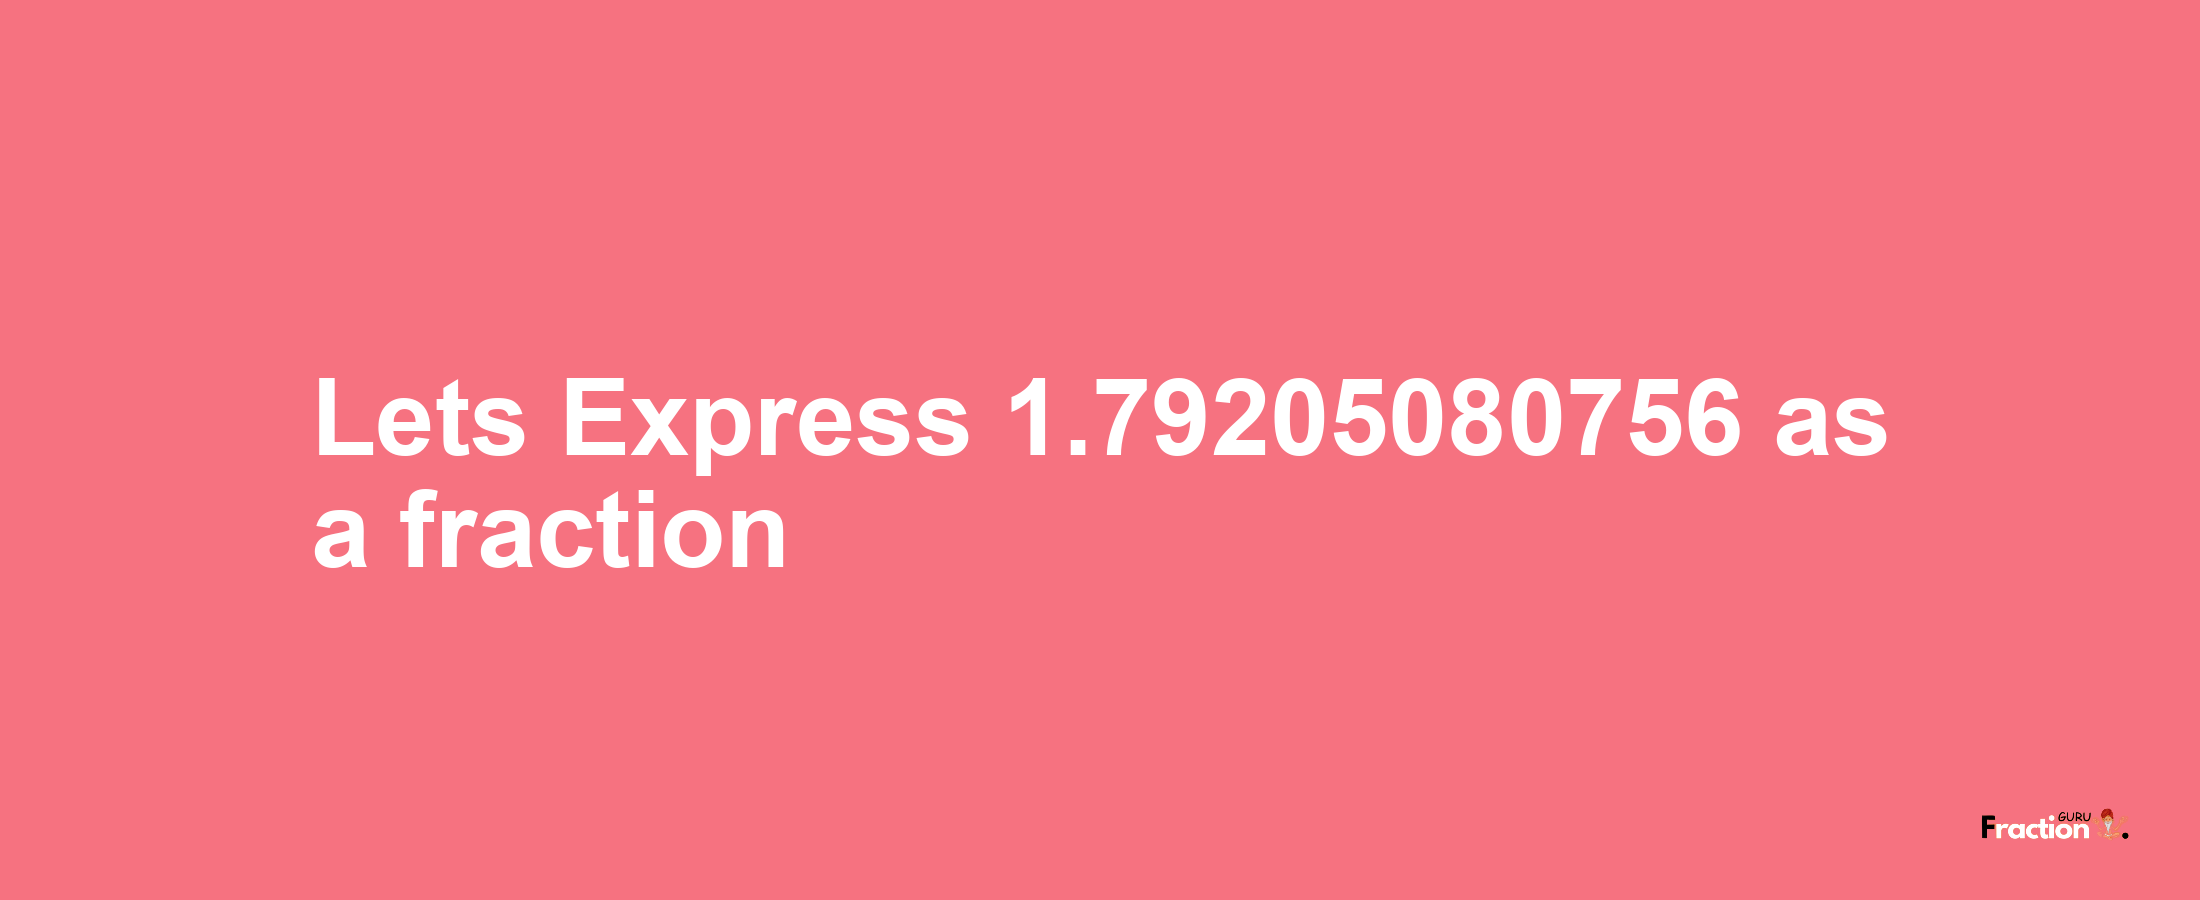 Lets Express 1.79205080756 as afraction